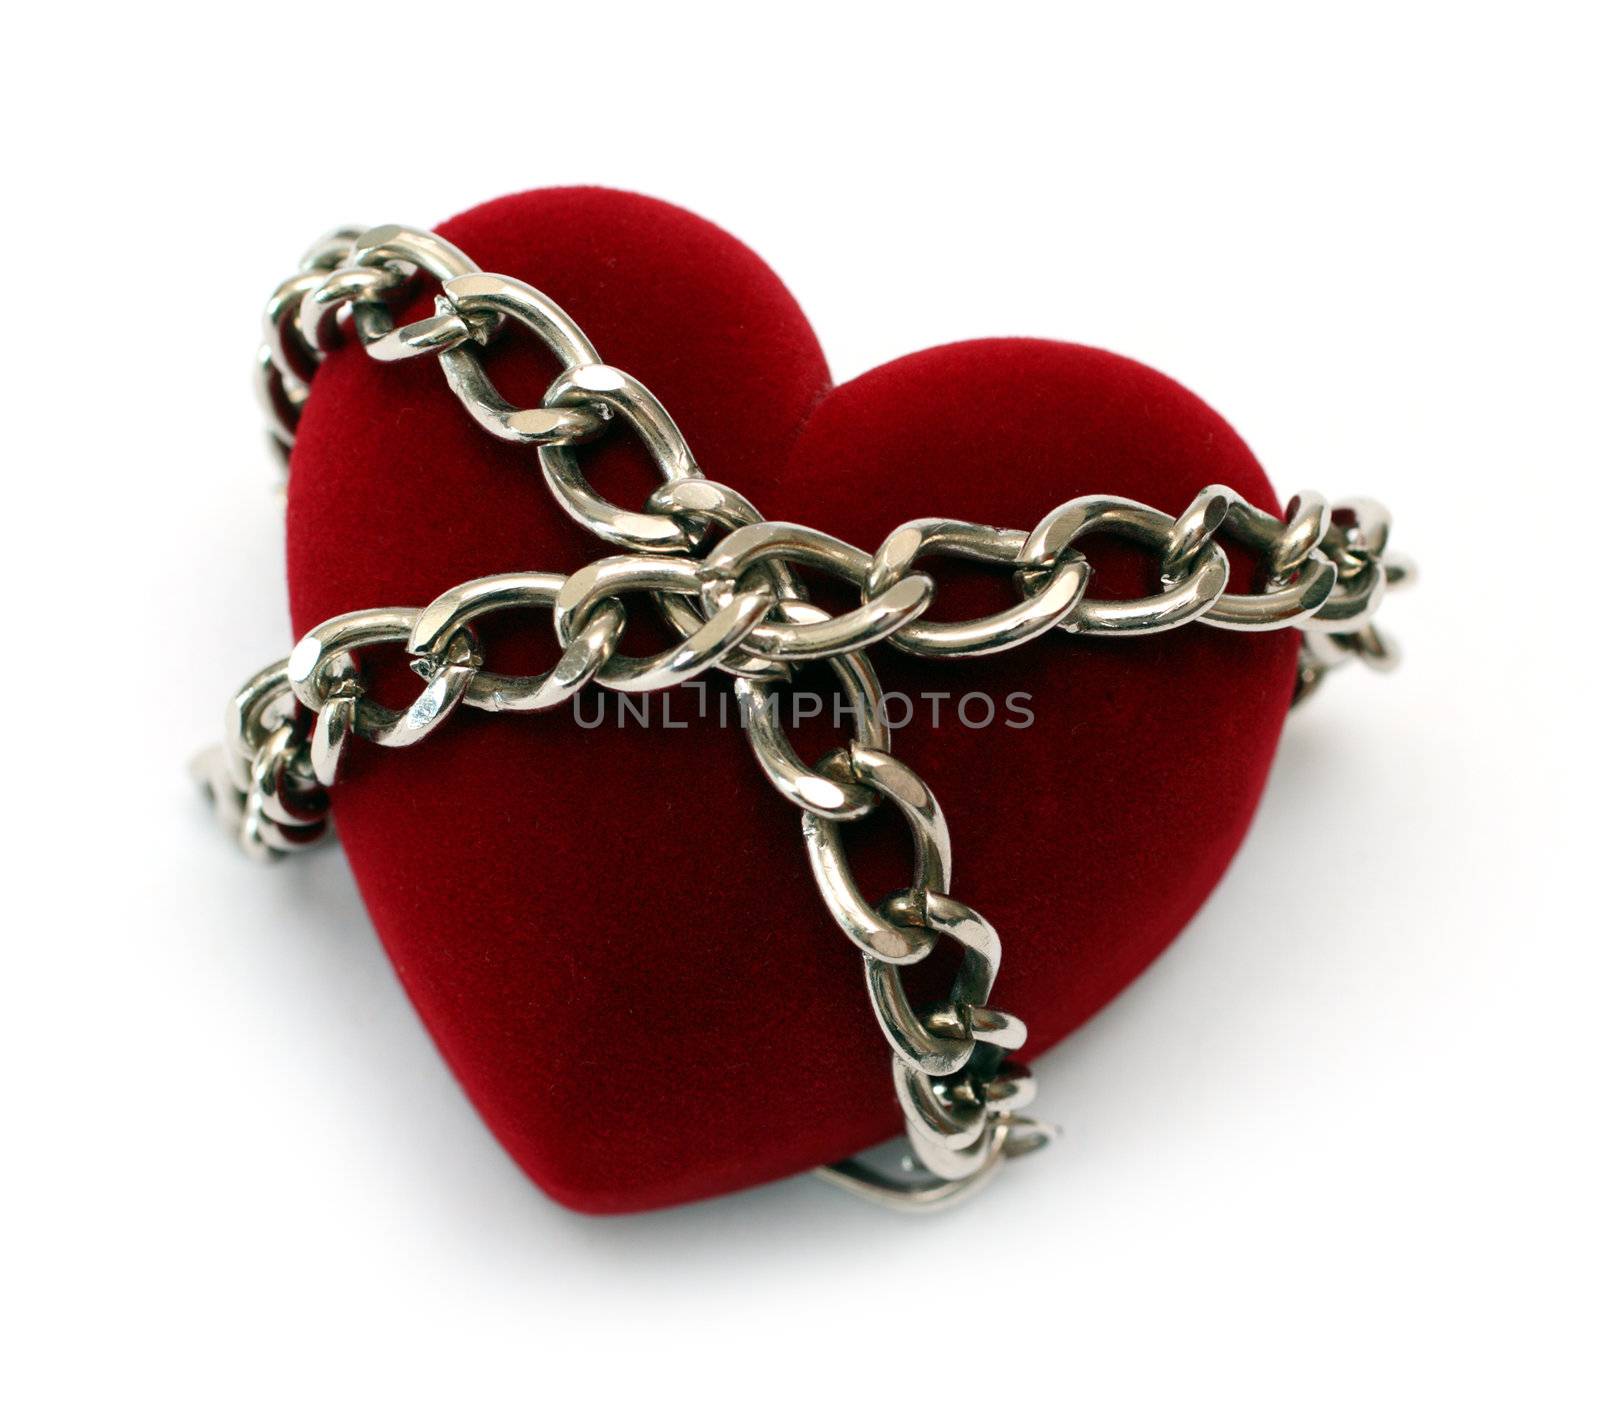 red heart locked with chain isolated on white